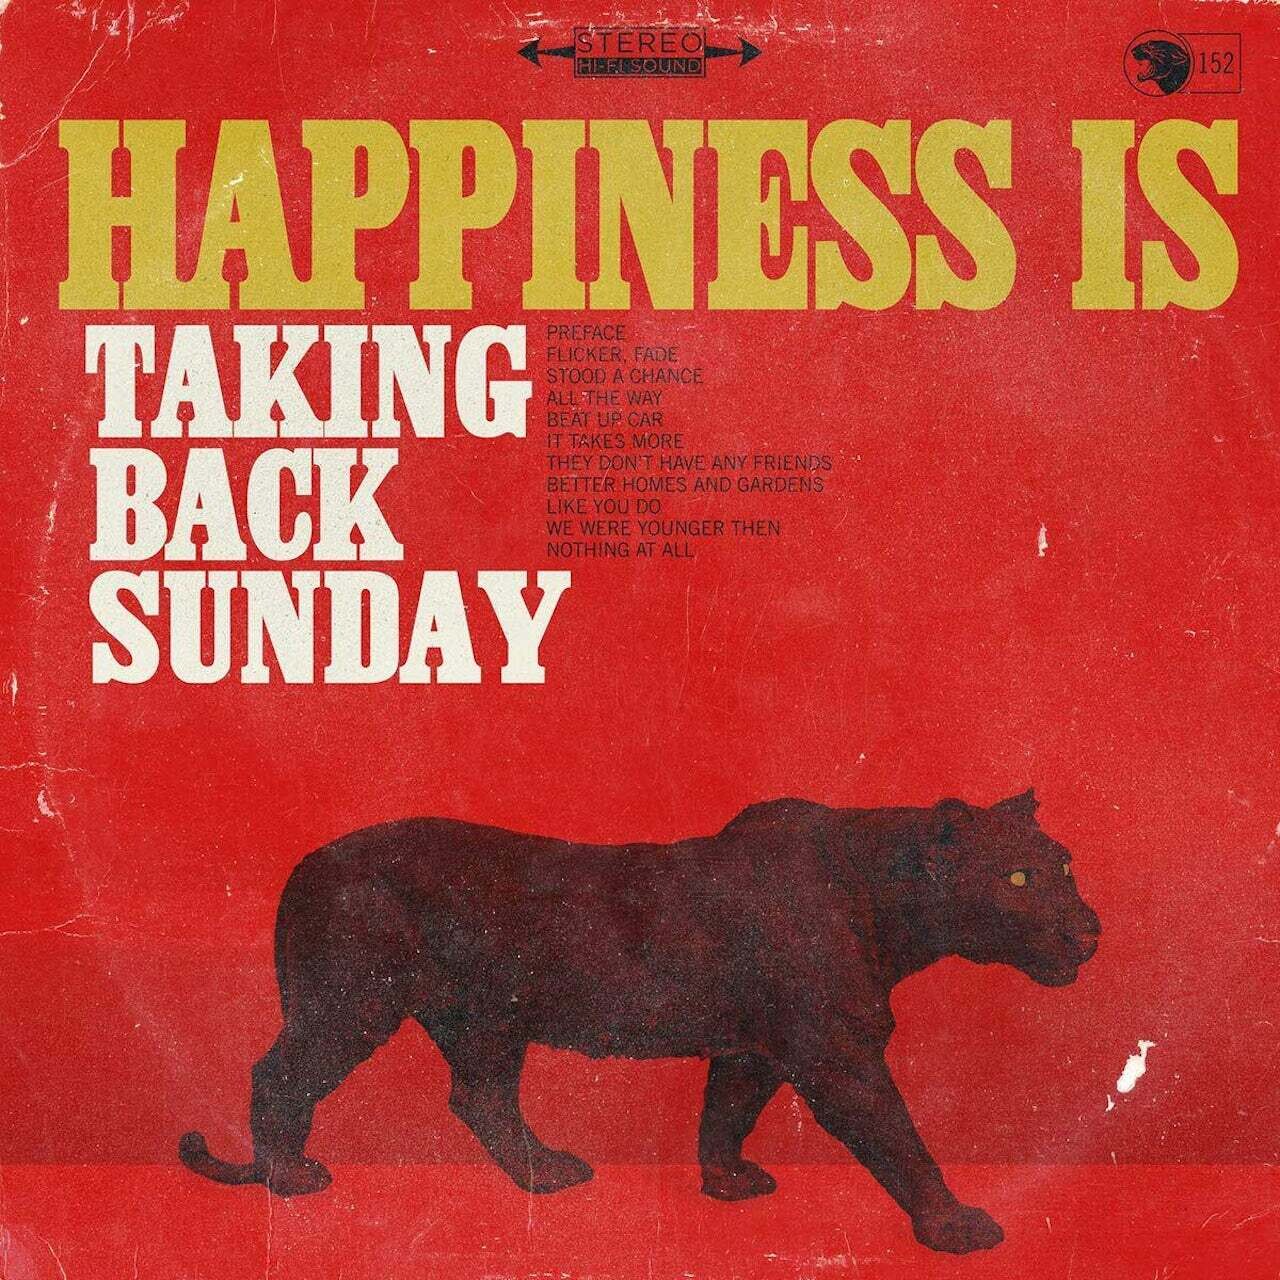 Taking Back Sunday / Happines Is